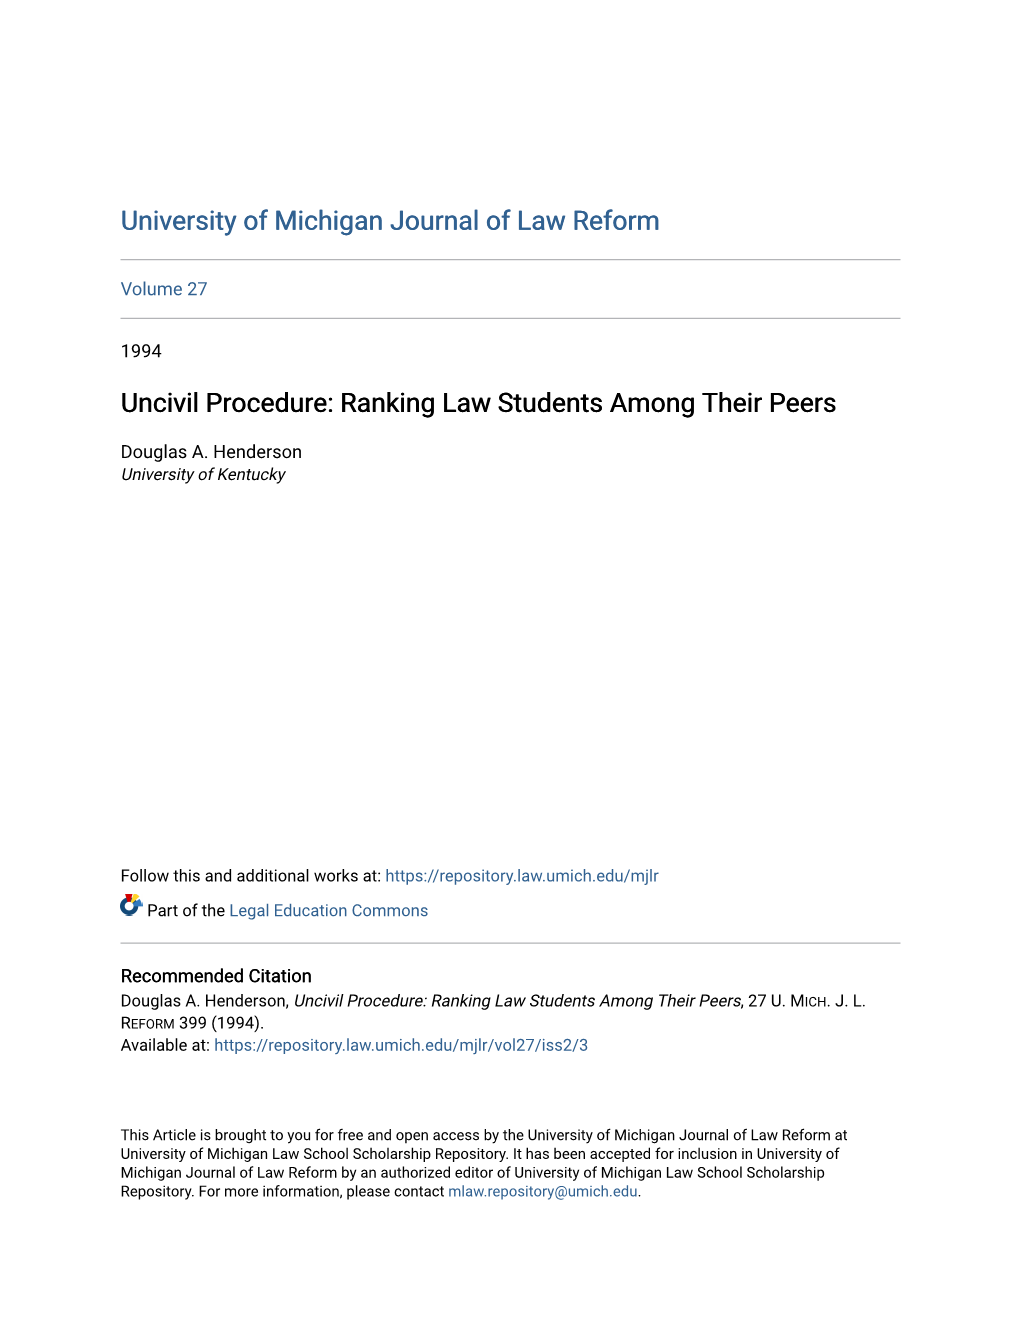 Uncivil Procedure: Ranking Law Students Among Their Peers